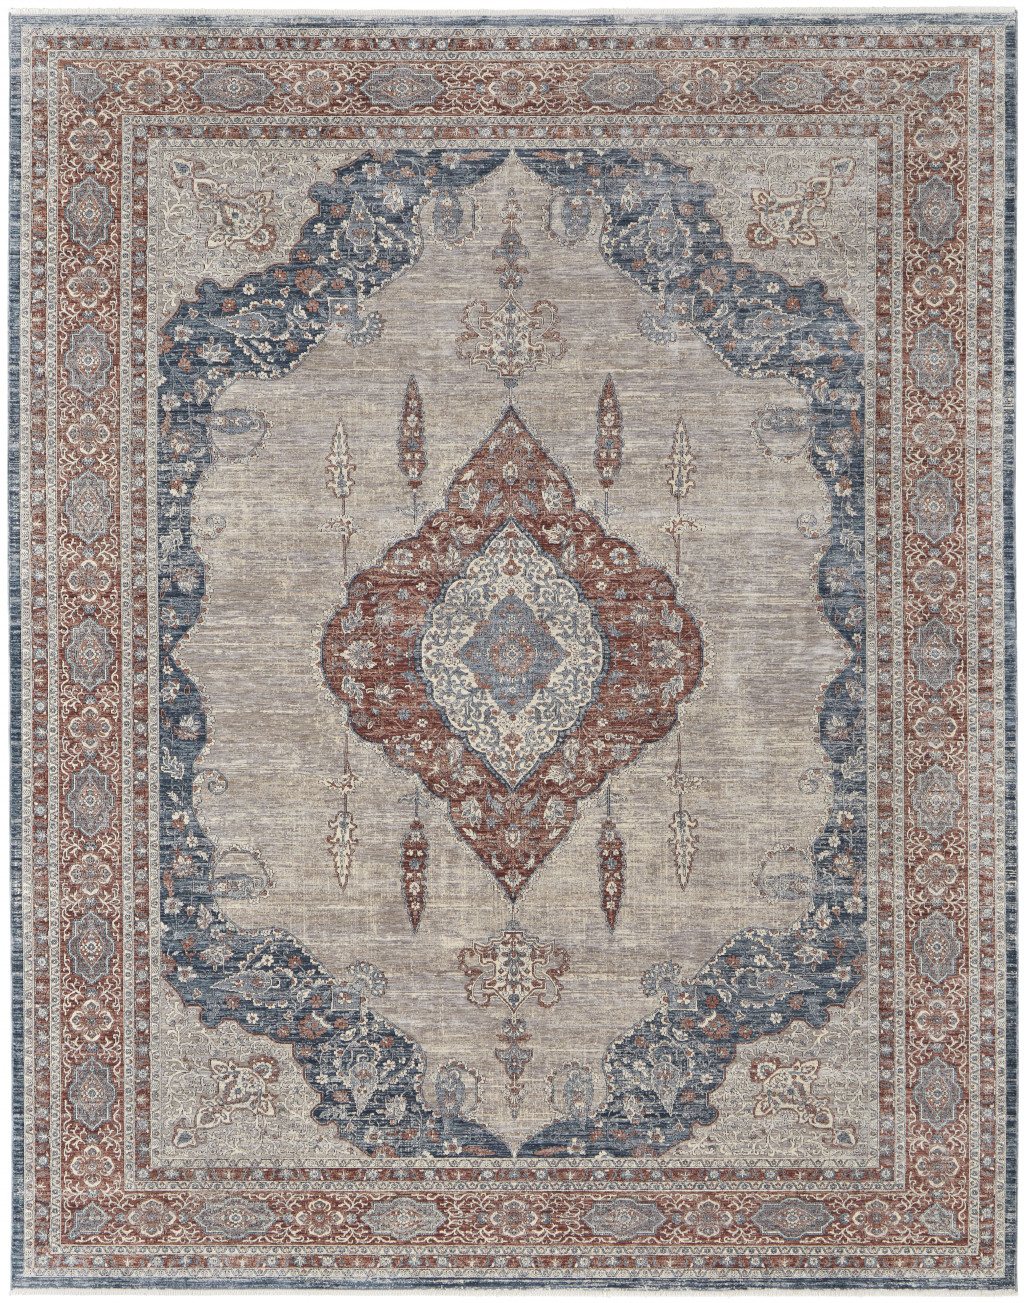 10' X 13' Gray Red And Blue Floral Power Loom Stain Resistant Area Rug-514459-1